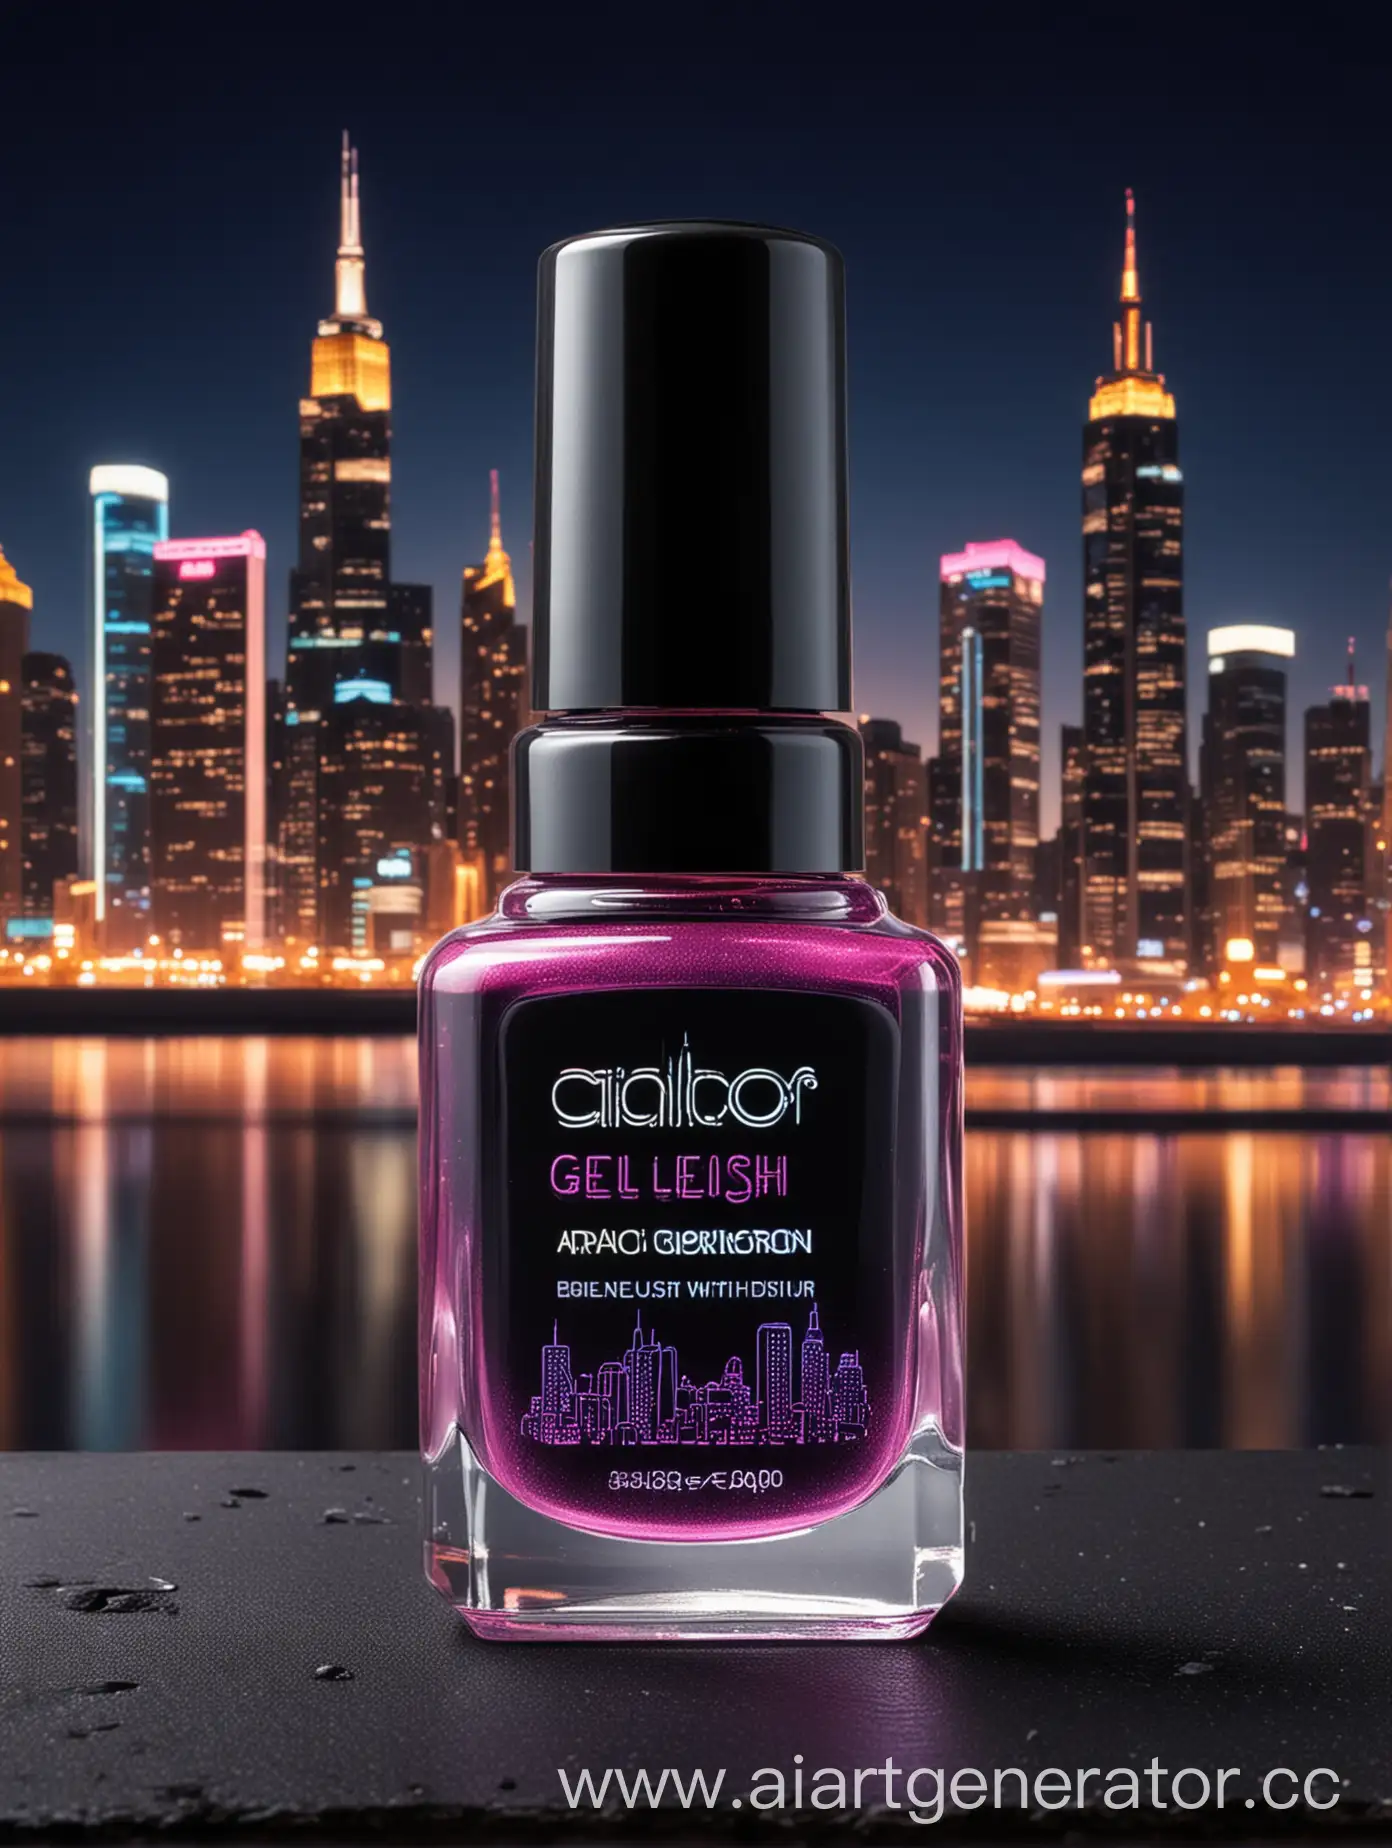 Icon with a bottle of gel polish on the background of a night city with neon lighting